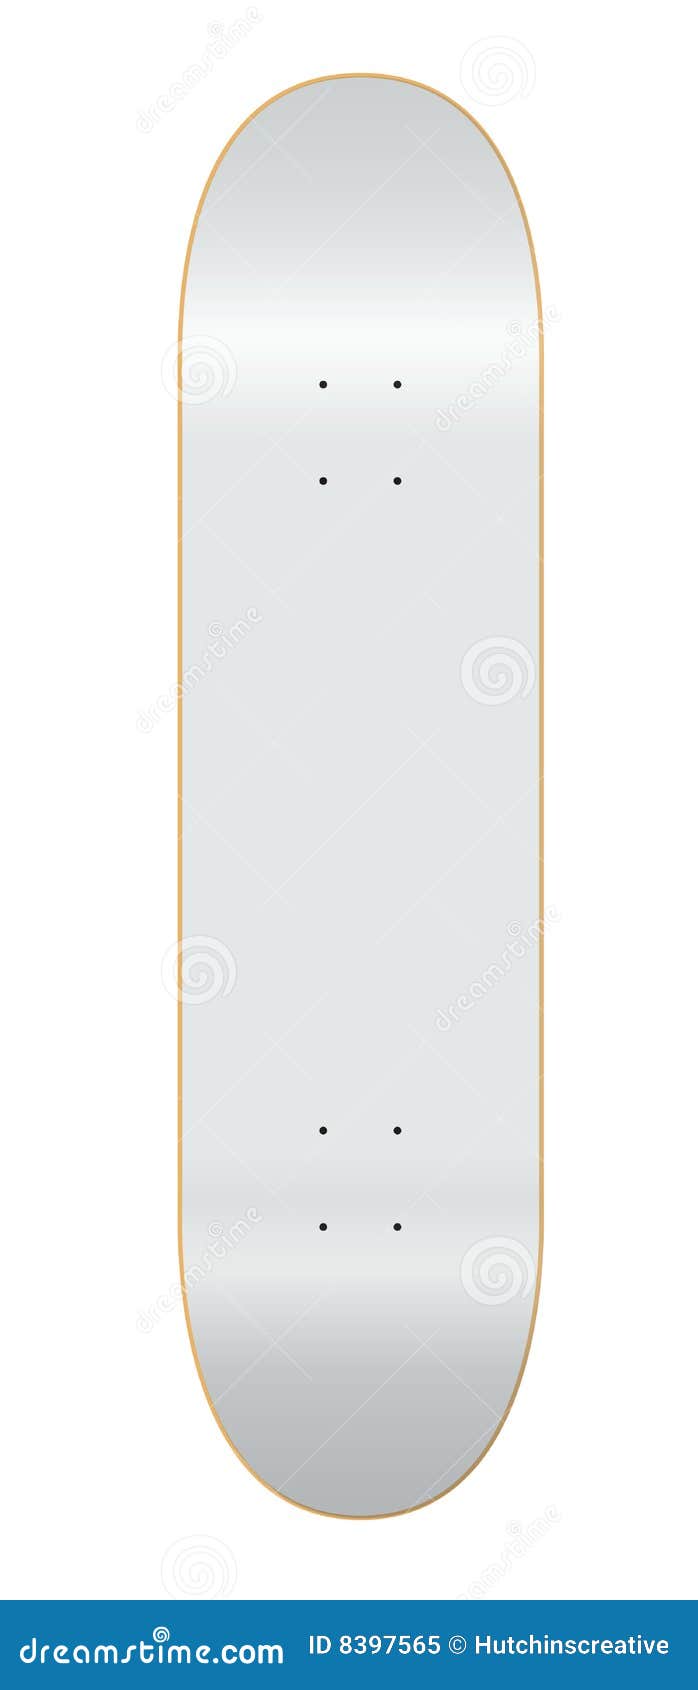 skateboard-deck-template-7-75-royalty-free-stock-photo-image-8397565